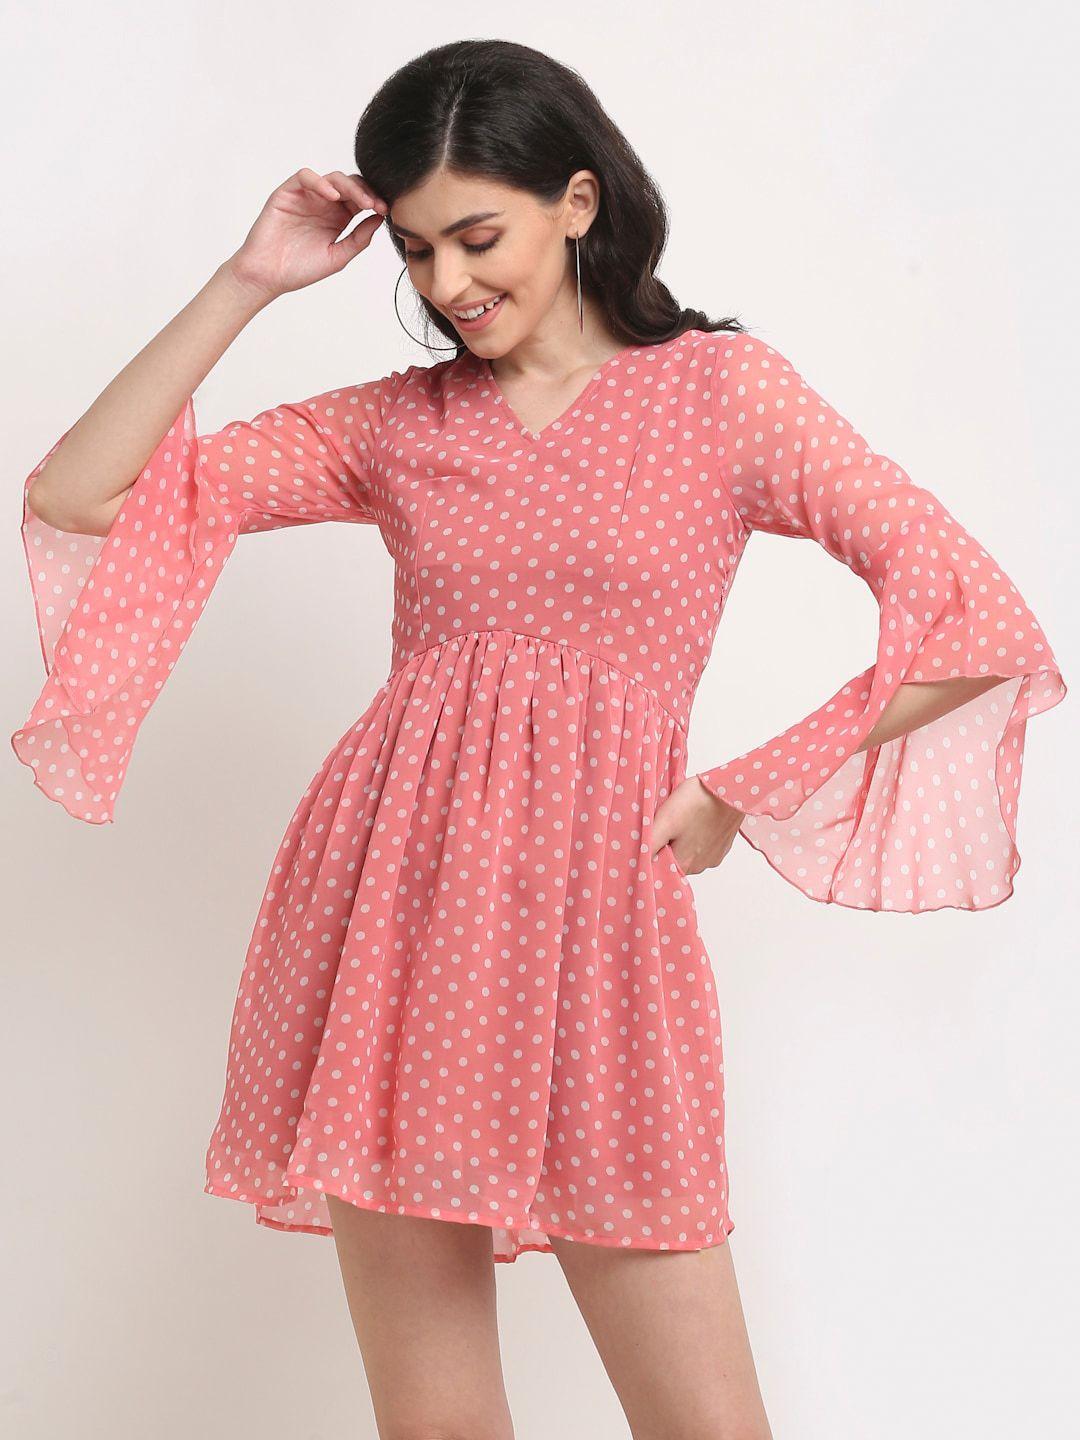 la-zoire-peach-coloured-&-white-polka-dots-printed-bell-sleeves-fit-&-flare-dress